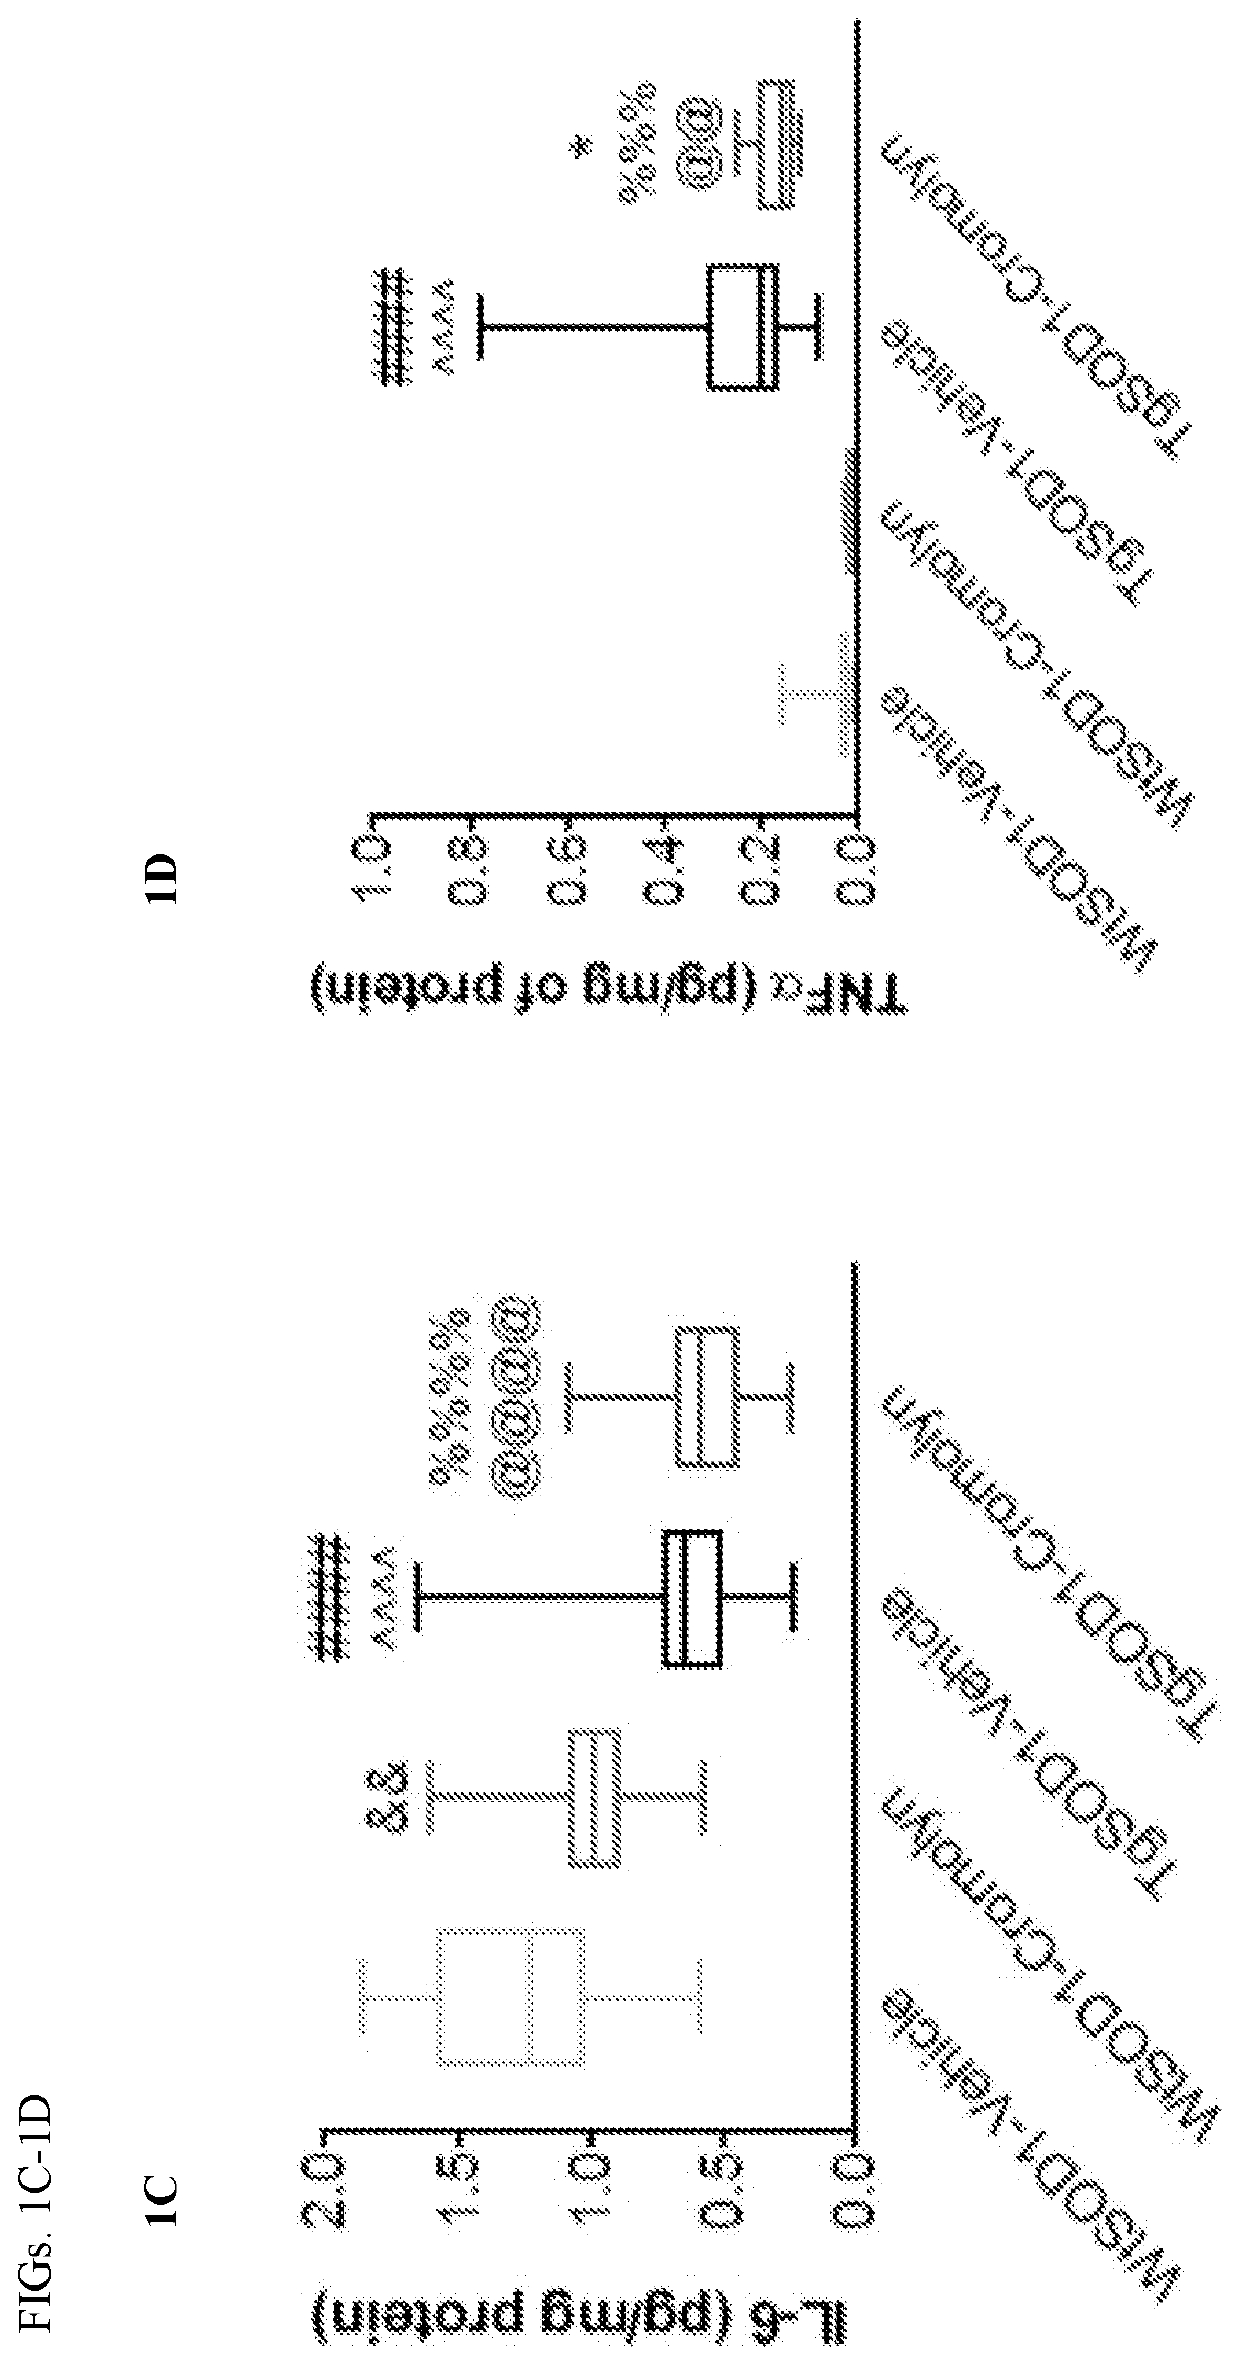 Methods of treating cytokine release syndrome